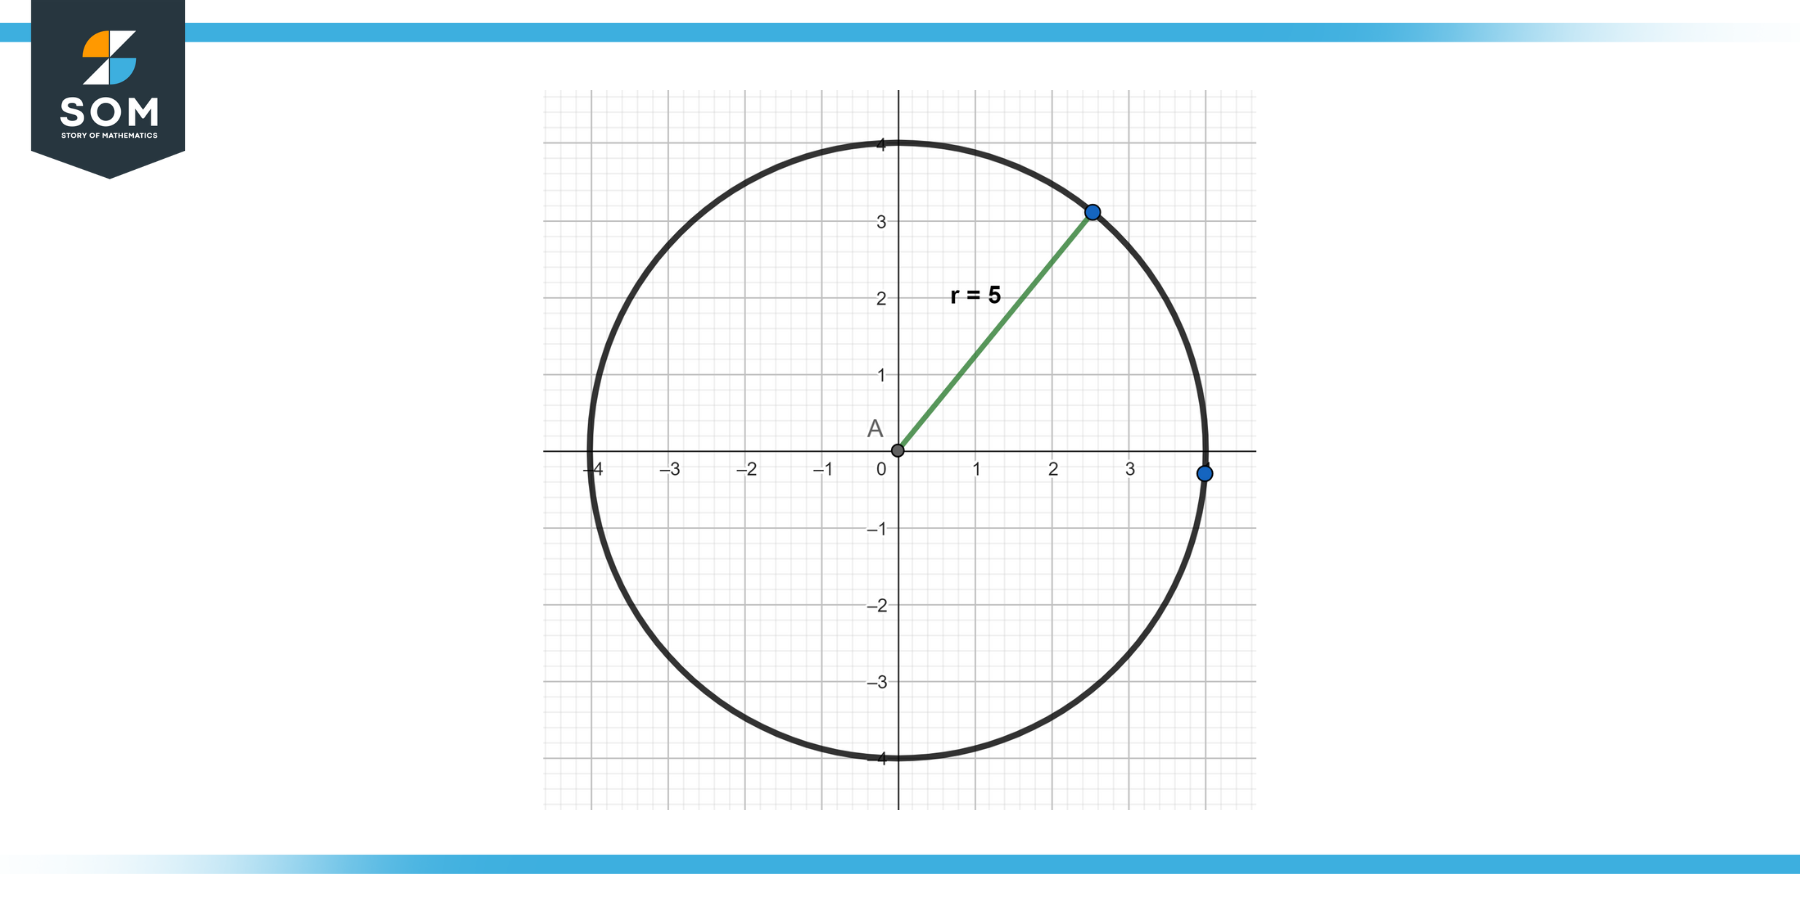 representation of the circle centered at 00 with radius equals 5